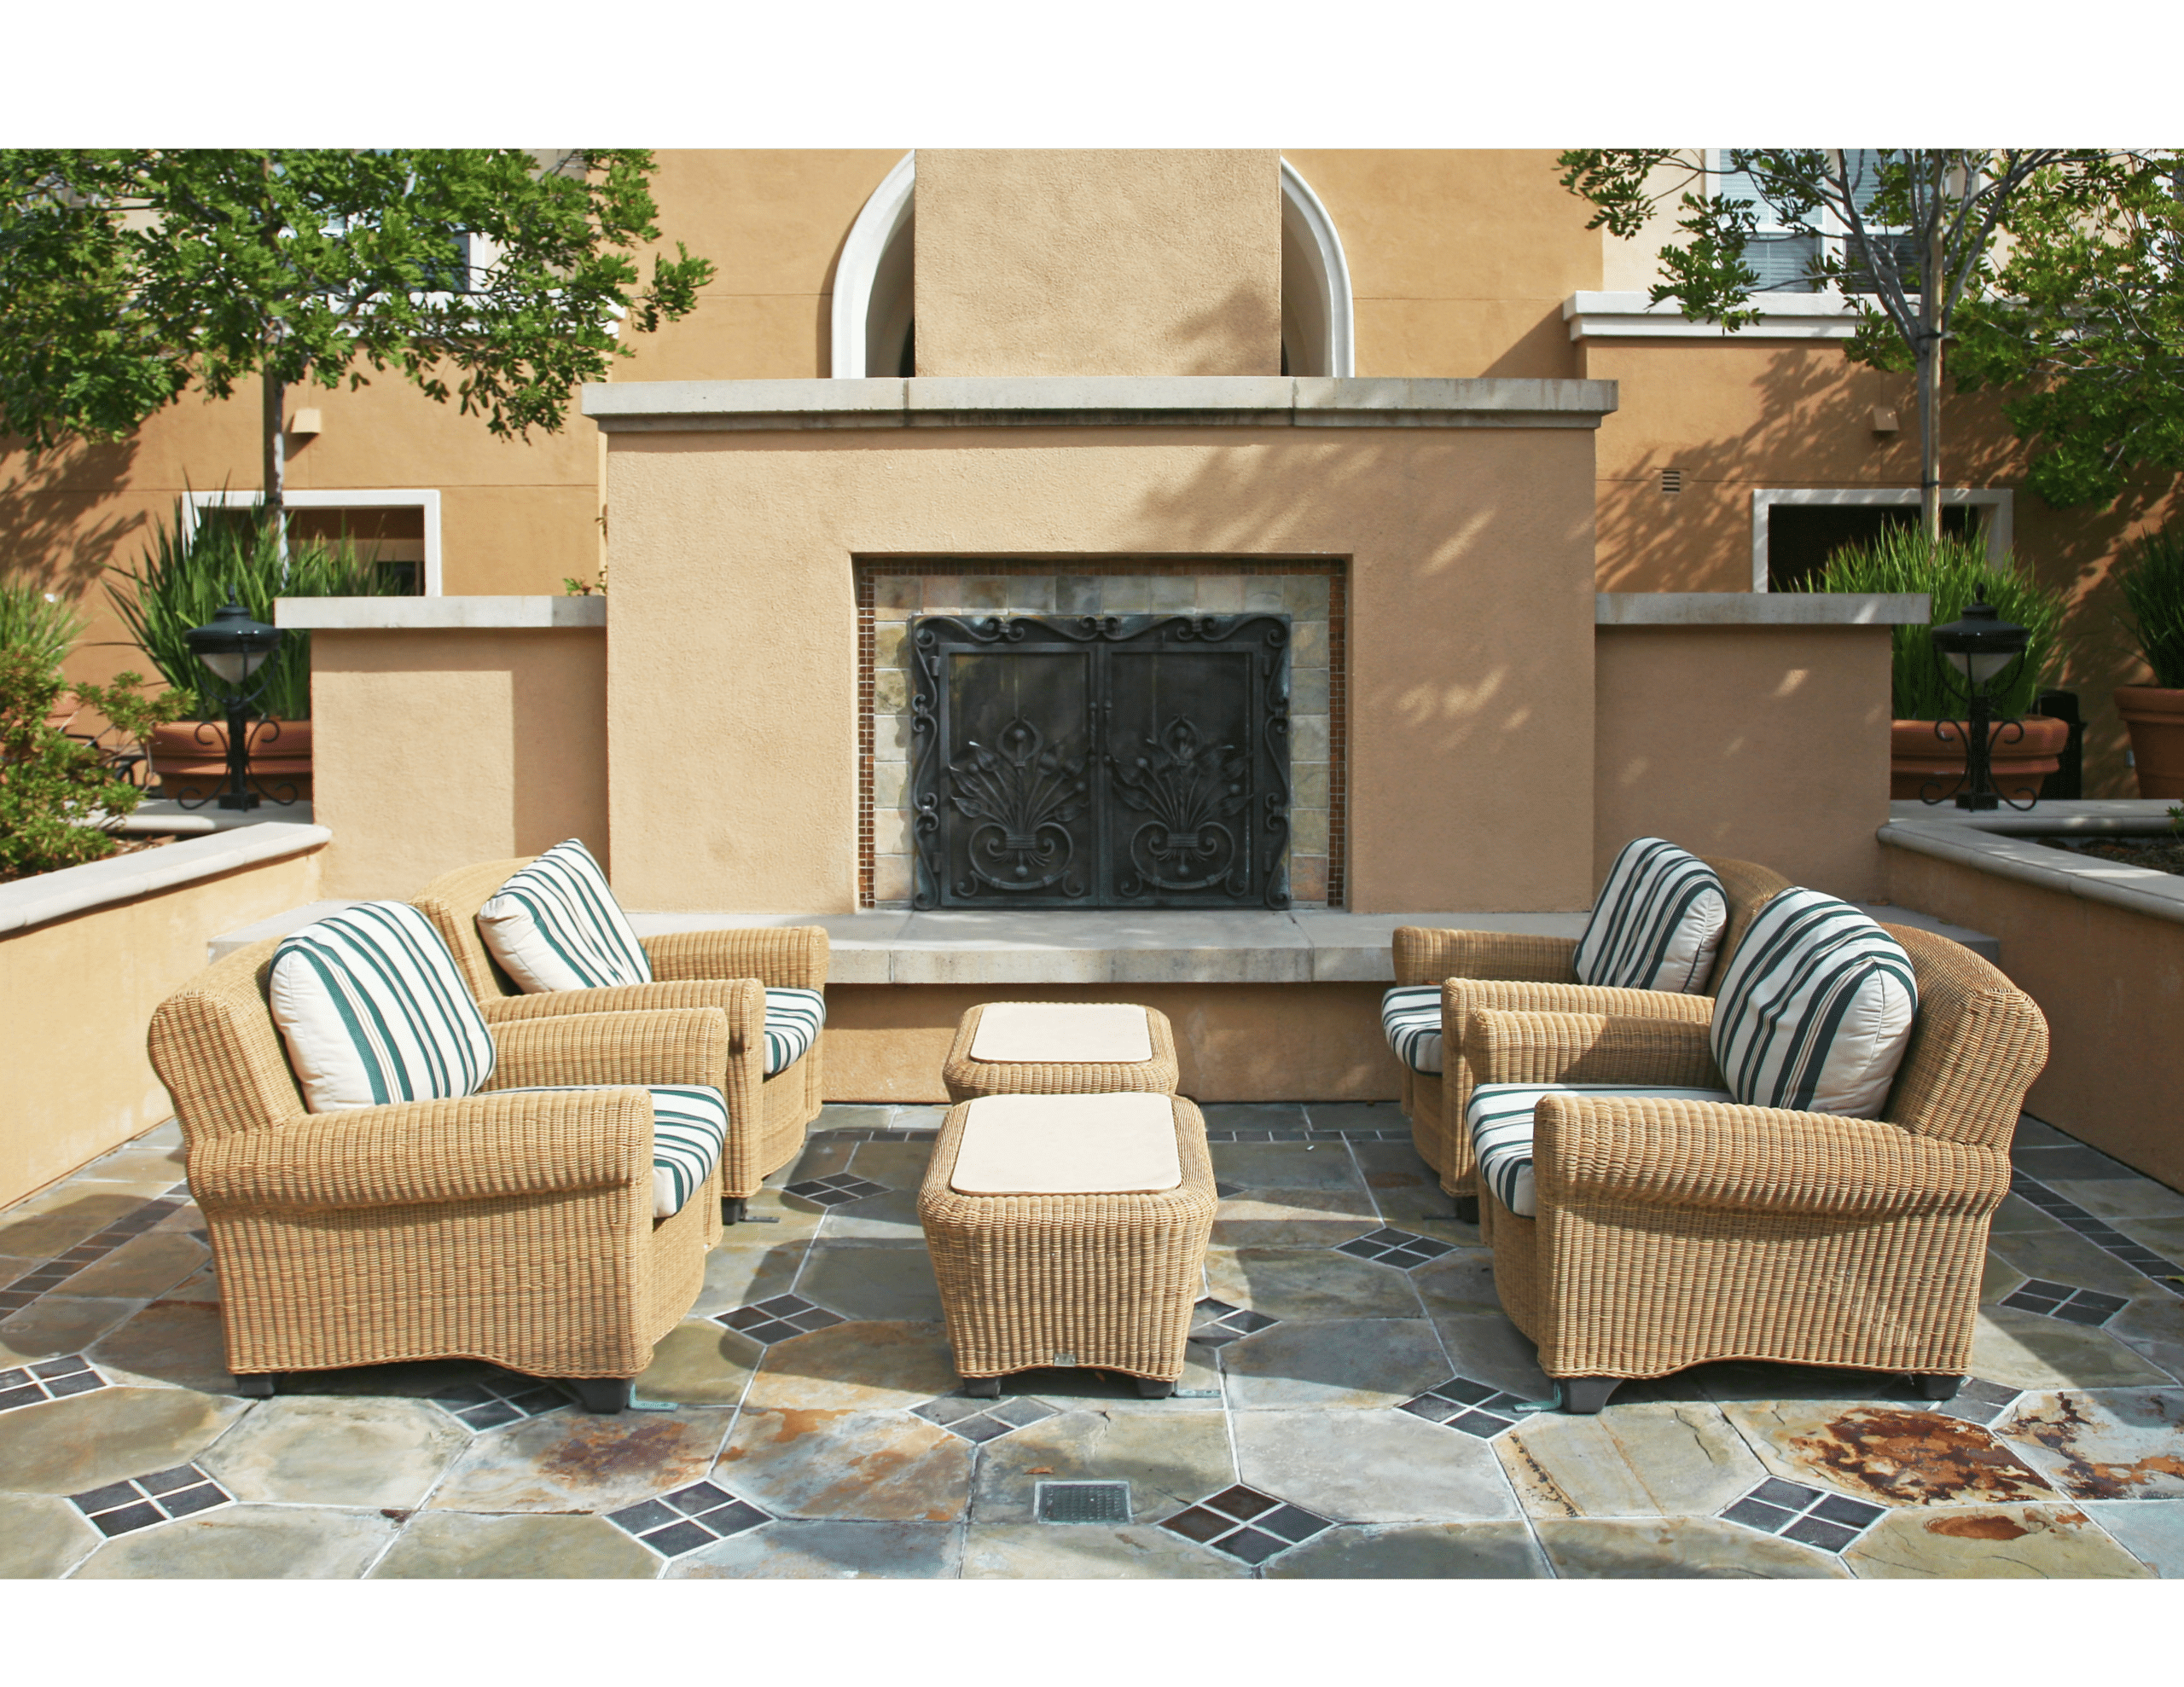 A patio with wicker furniture and a fireplace.